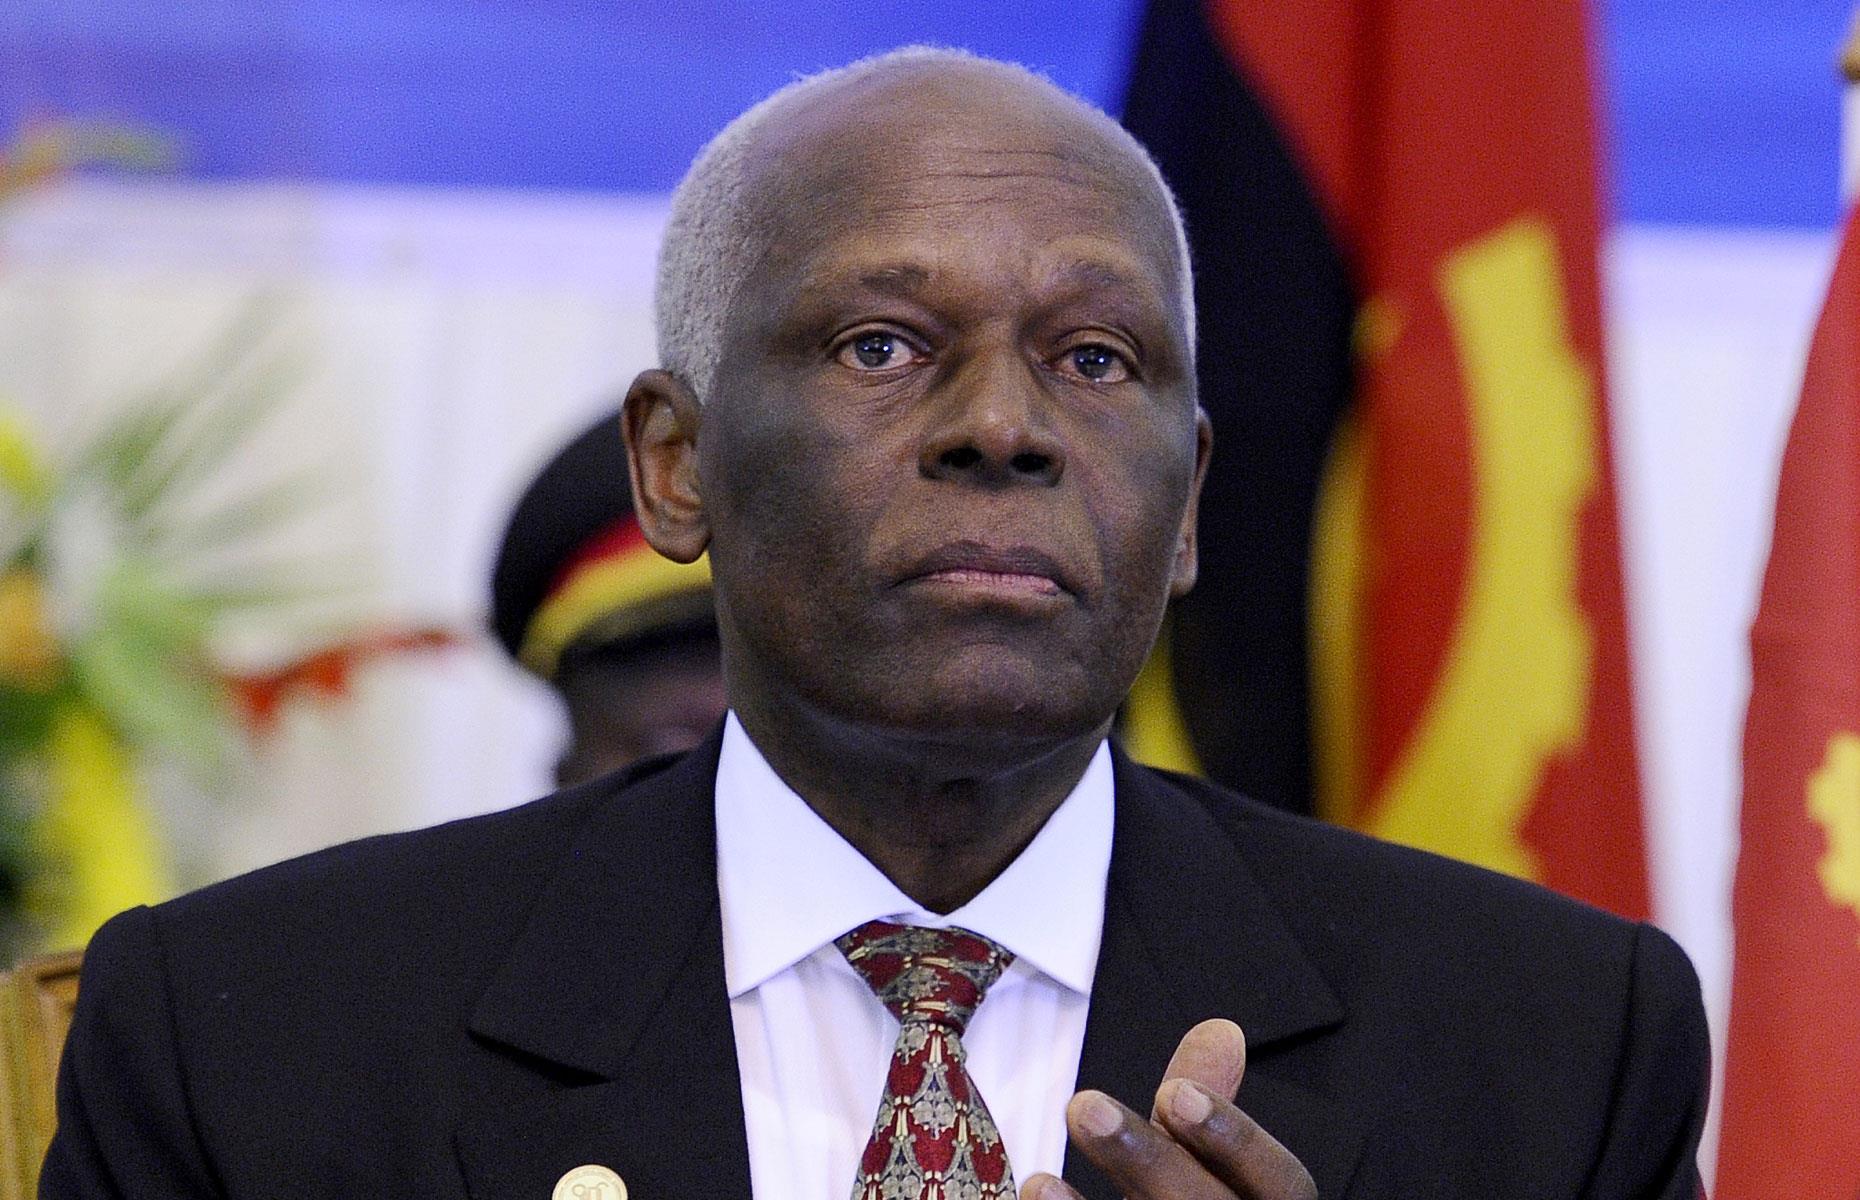 <p>The former president of Angola hoarded enormous sums of money when he was leader of the country from 1979 to 2017. Ignoring the plight of his people, who are in the most part poverty-stricken, the politician chose to enrich himself and his family instead and is now worth an estimated $20 billion. His daughter Isabel is Africa's richest woman with a net worth of $1.4 billion, according to <em>Forbes</em>.</p>